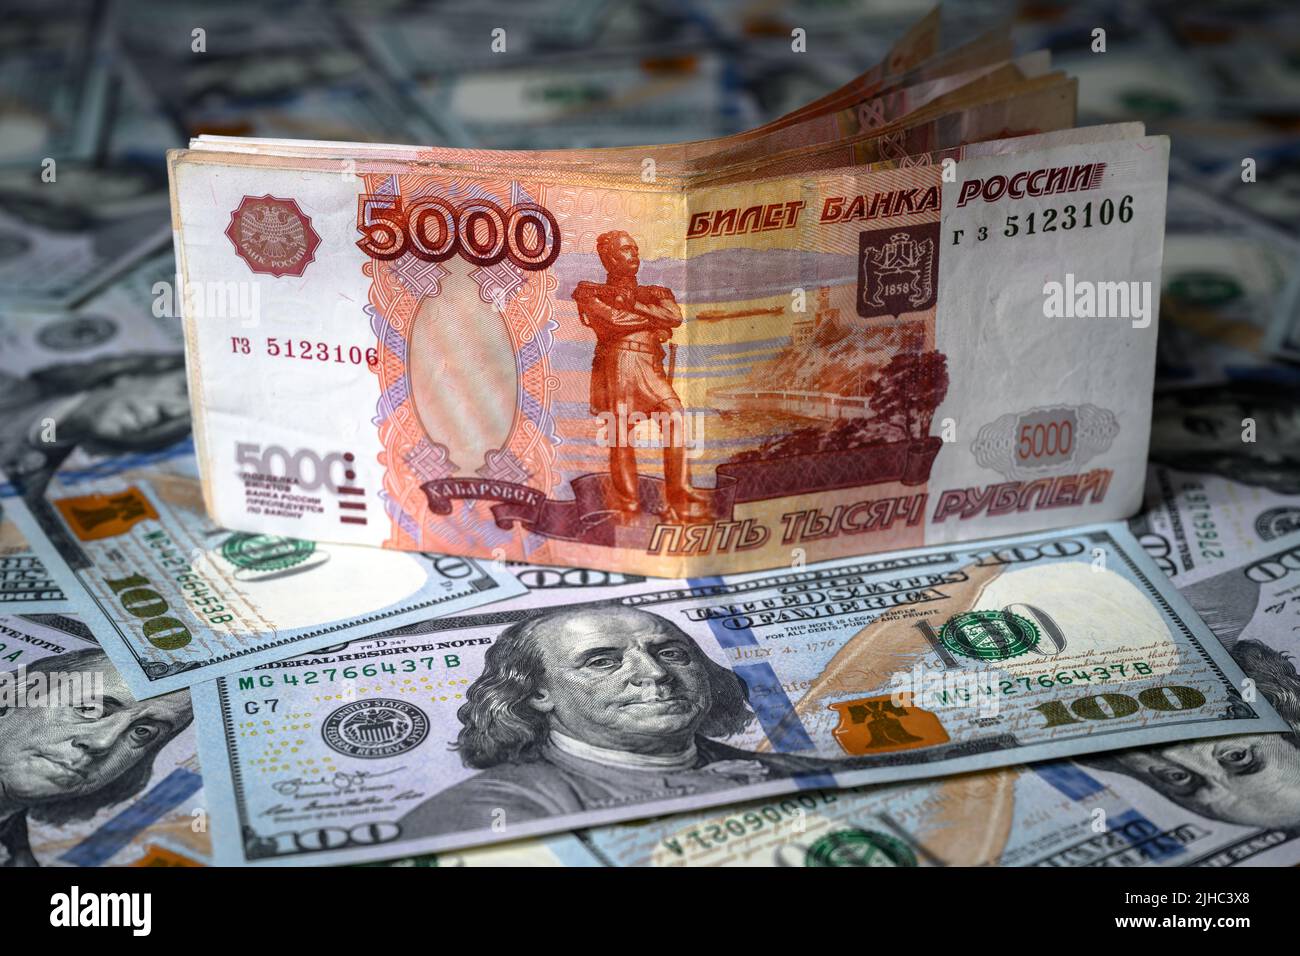 Russian ruble money vs US dollar, ruble banknote is on top of dollar bills pile. Concept of sanctions, currency, victory of ruble, economy of Russia a Stock Photo